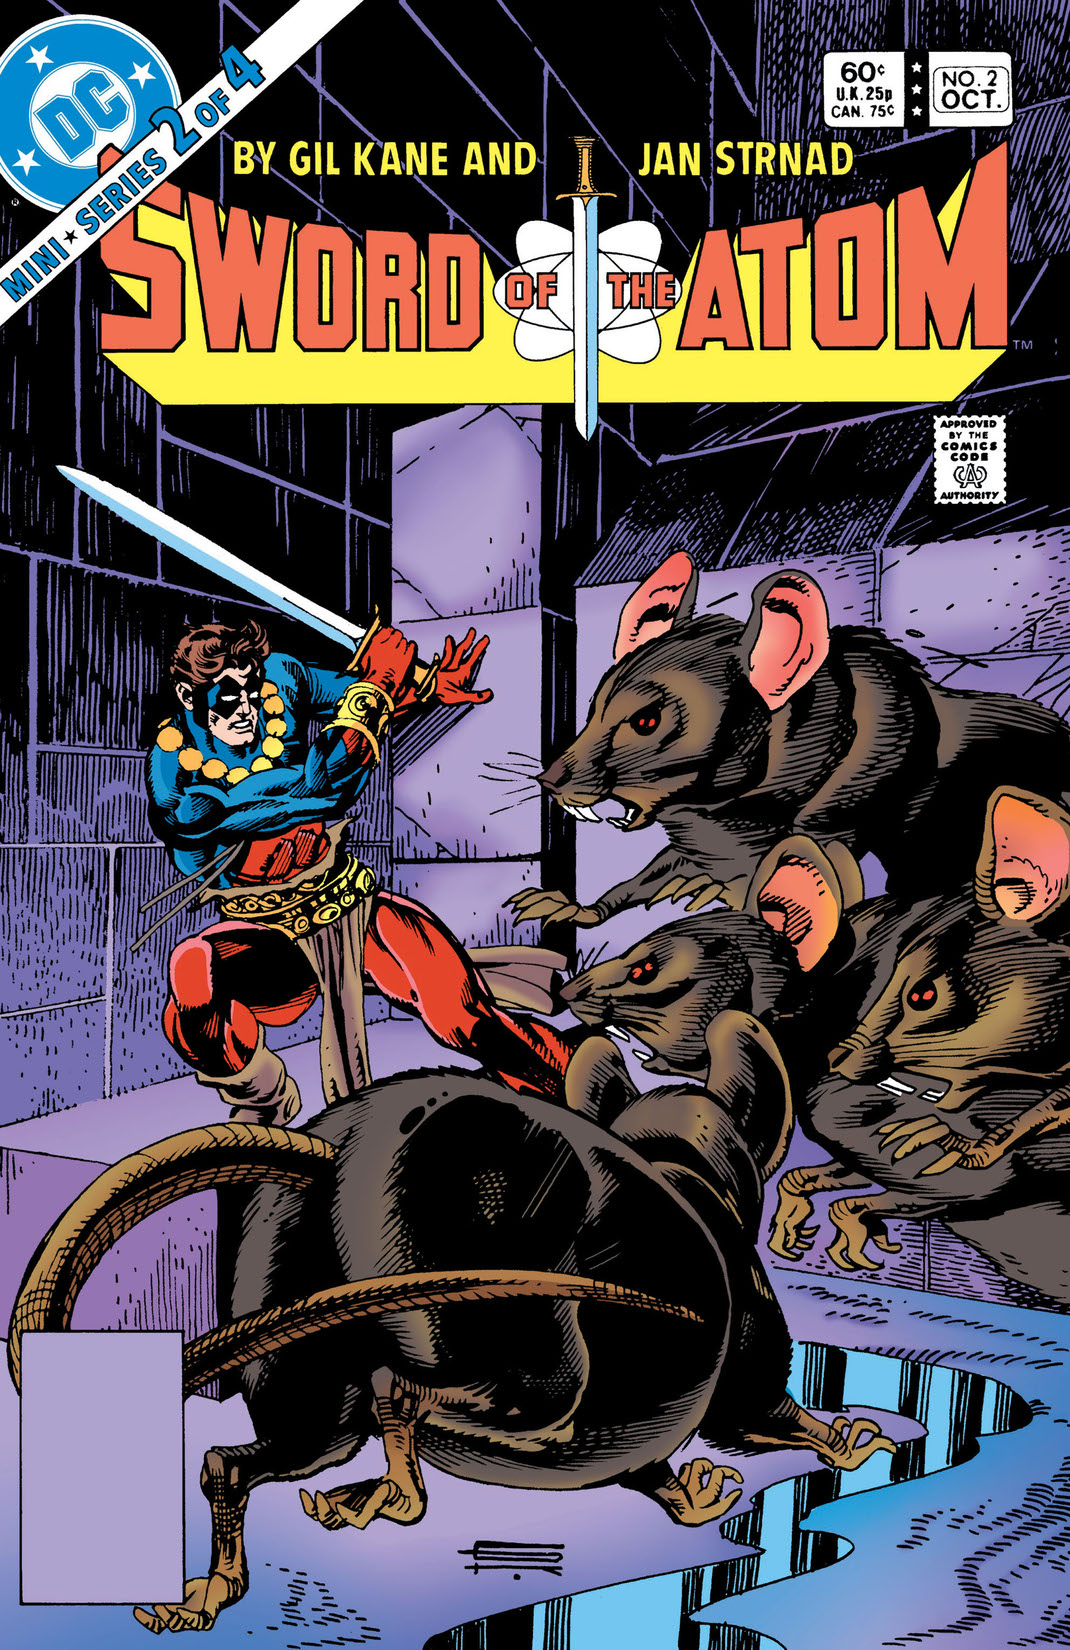 Sword of the Atom #2 preview images